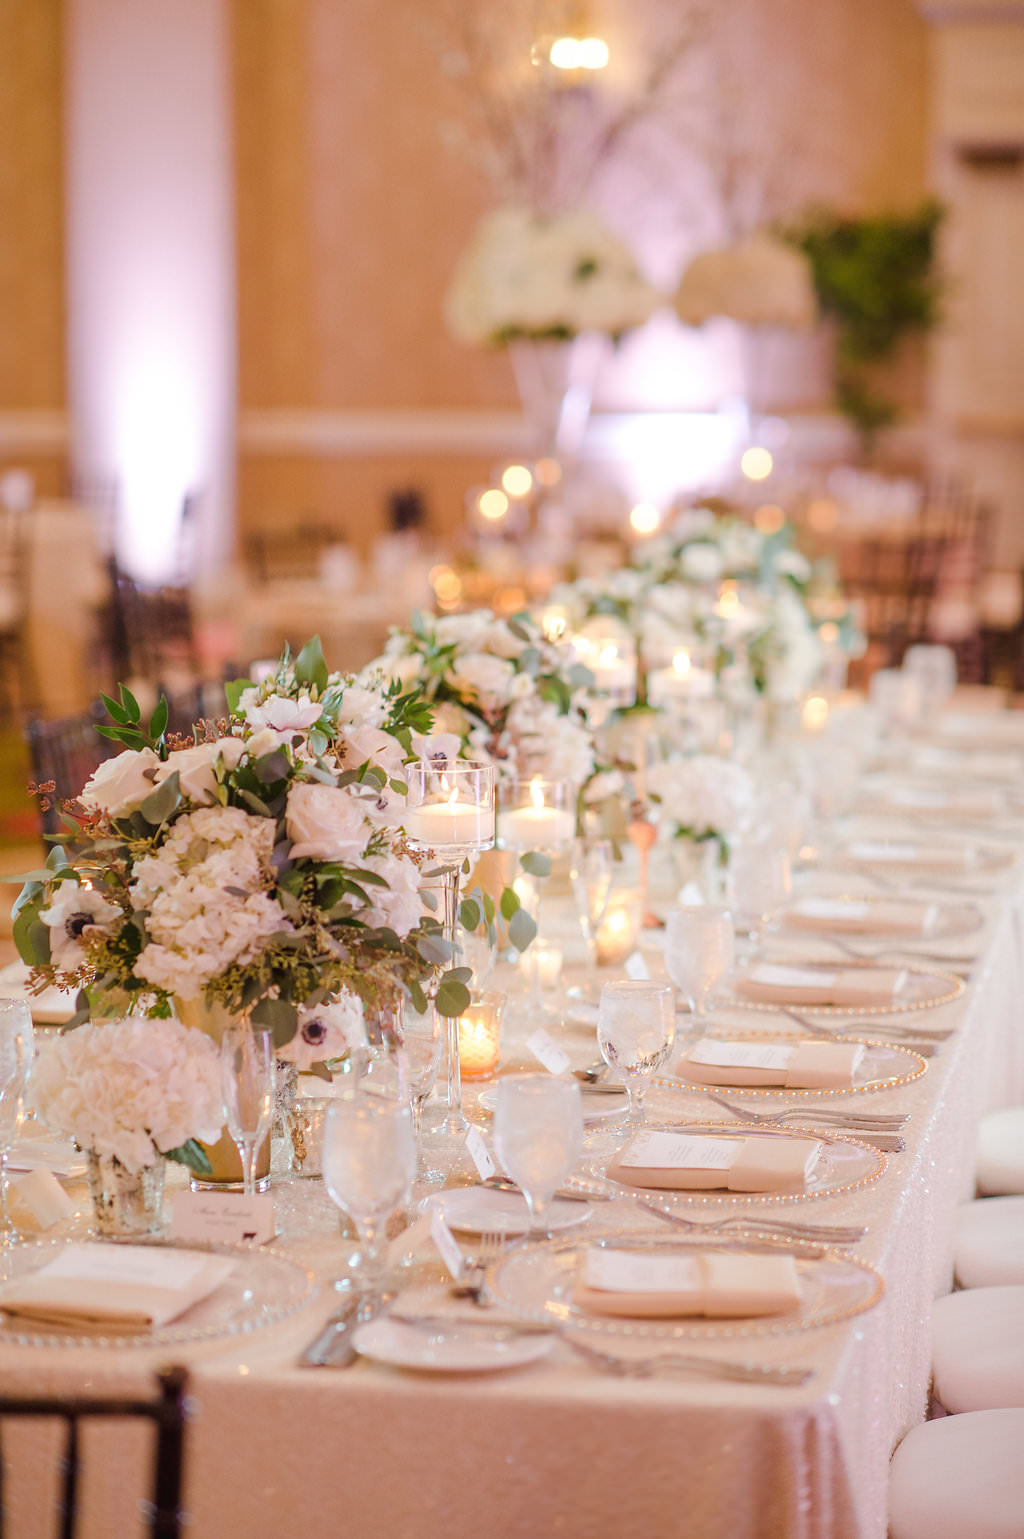 Hotel Ballroom Gold and White Wedding Reception Long Feasting Table with Black Chiavari Chairs, Low white and Greenery centerpieces in Gold Vases with votive candles and white draping | Tampa Bay Historic Wedding Venue The Vinoy